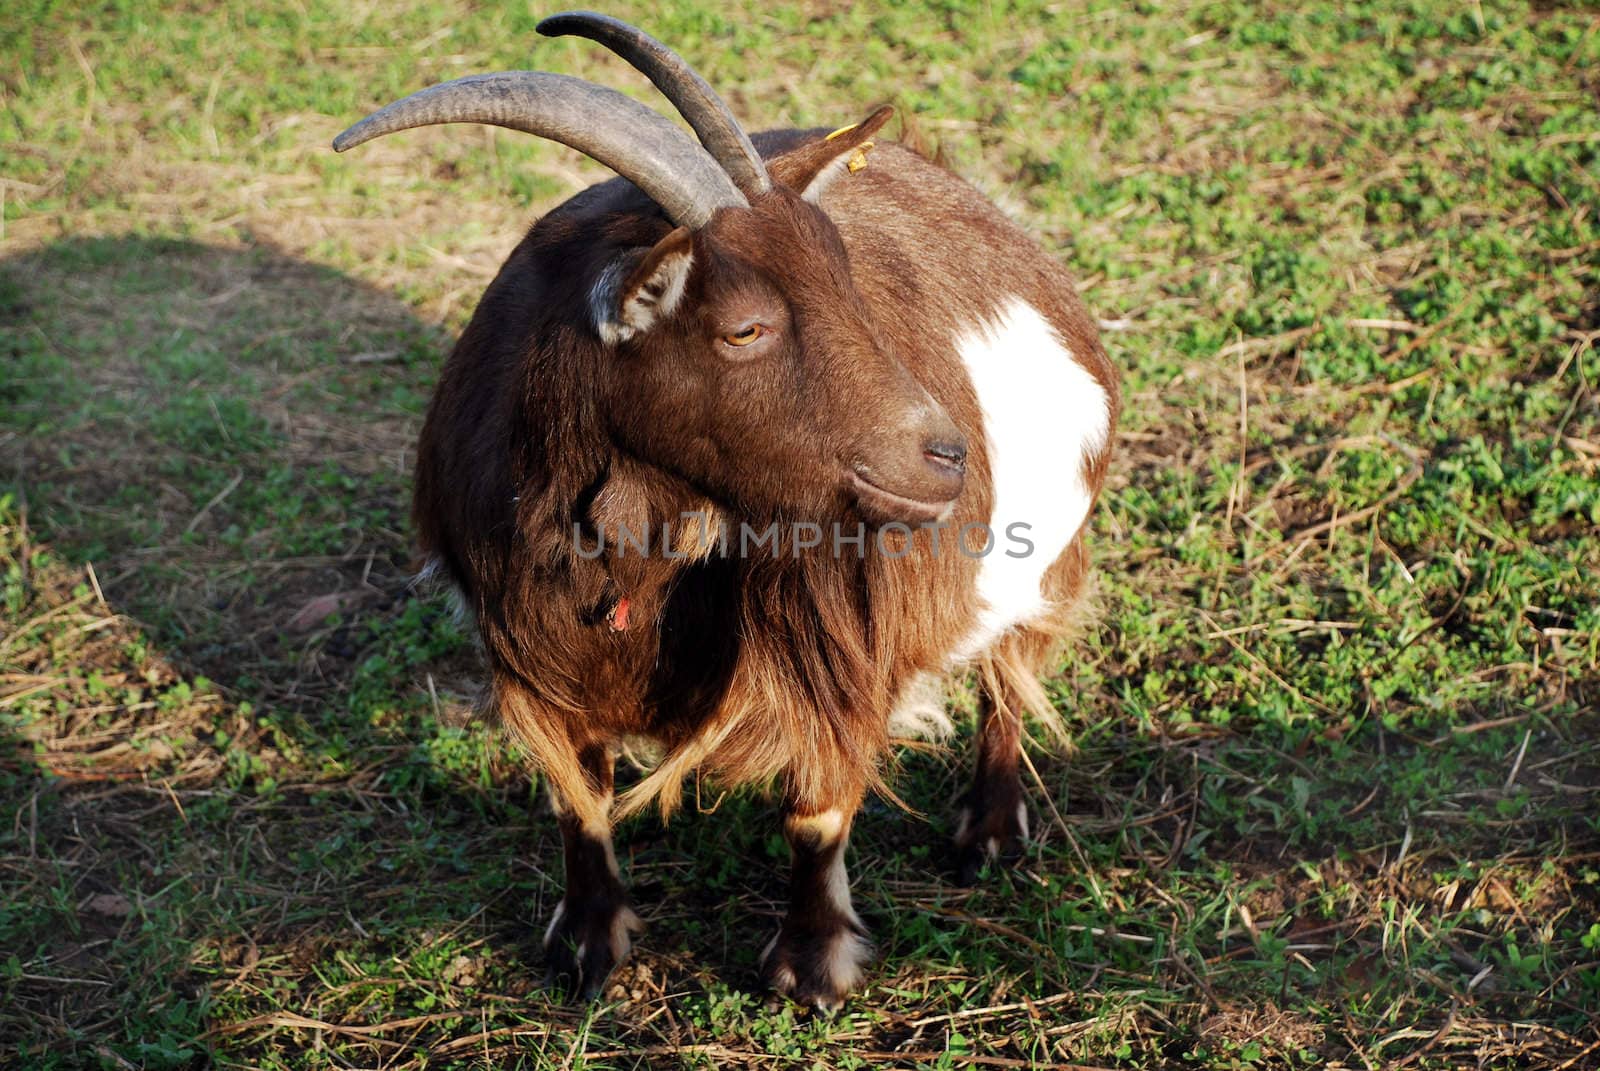 A photograph of a goat with very large horns